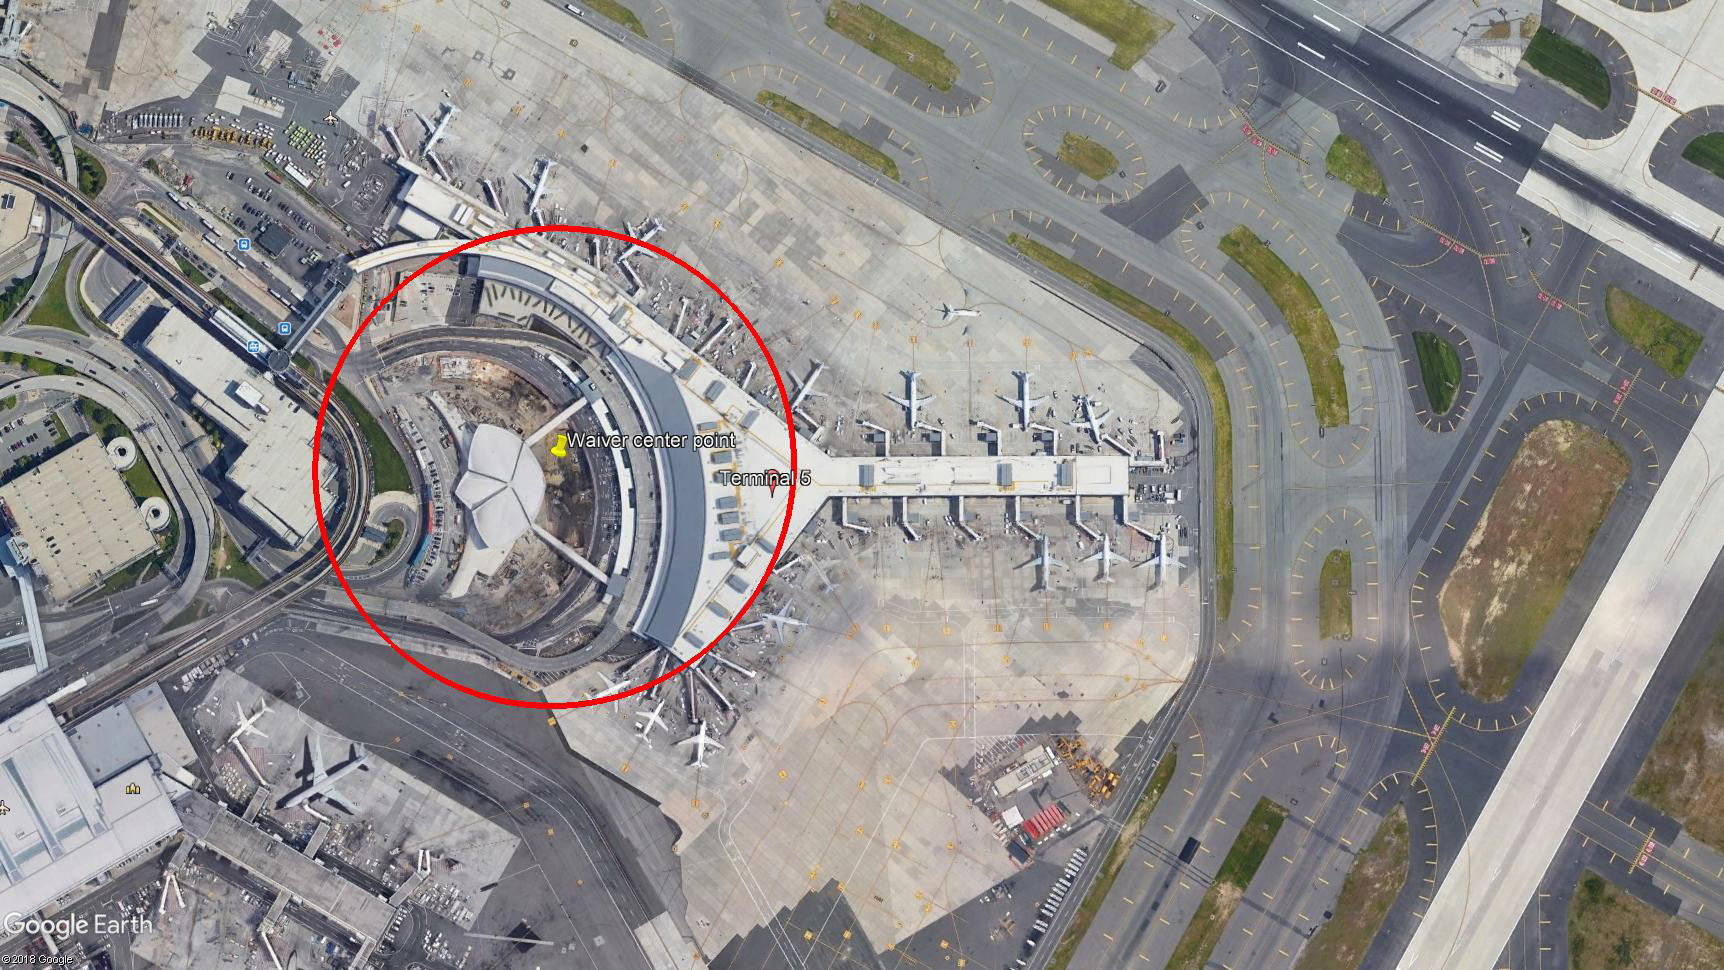 This Google Earth view of John F. Kennedy International Airport shows the area where the FAA allowed Cinematic Aerospace to conduct drone operations under a waiver granted in February. Google Earth image with graphics created by AOPA based on waiver provisions.